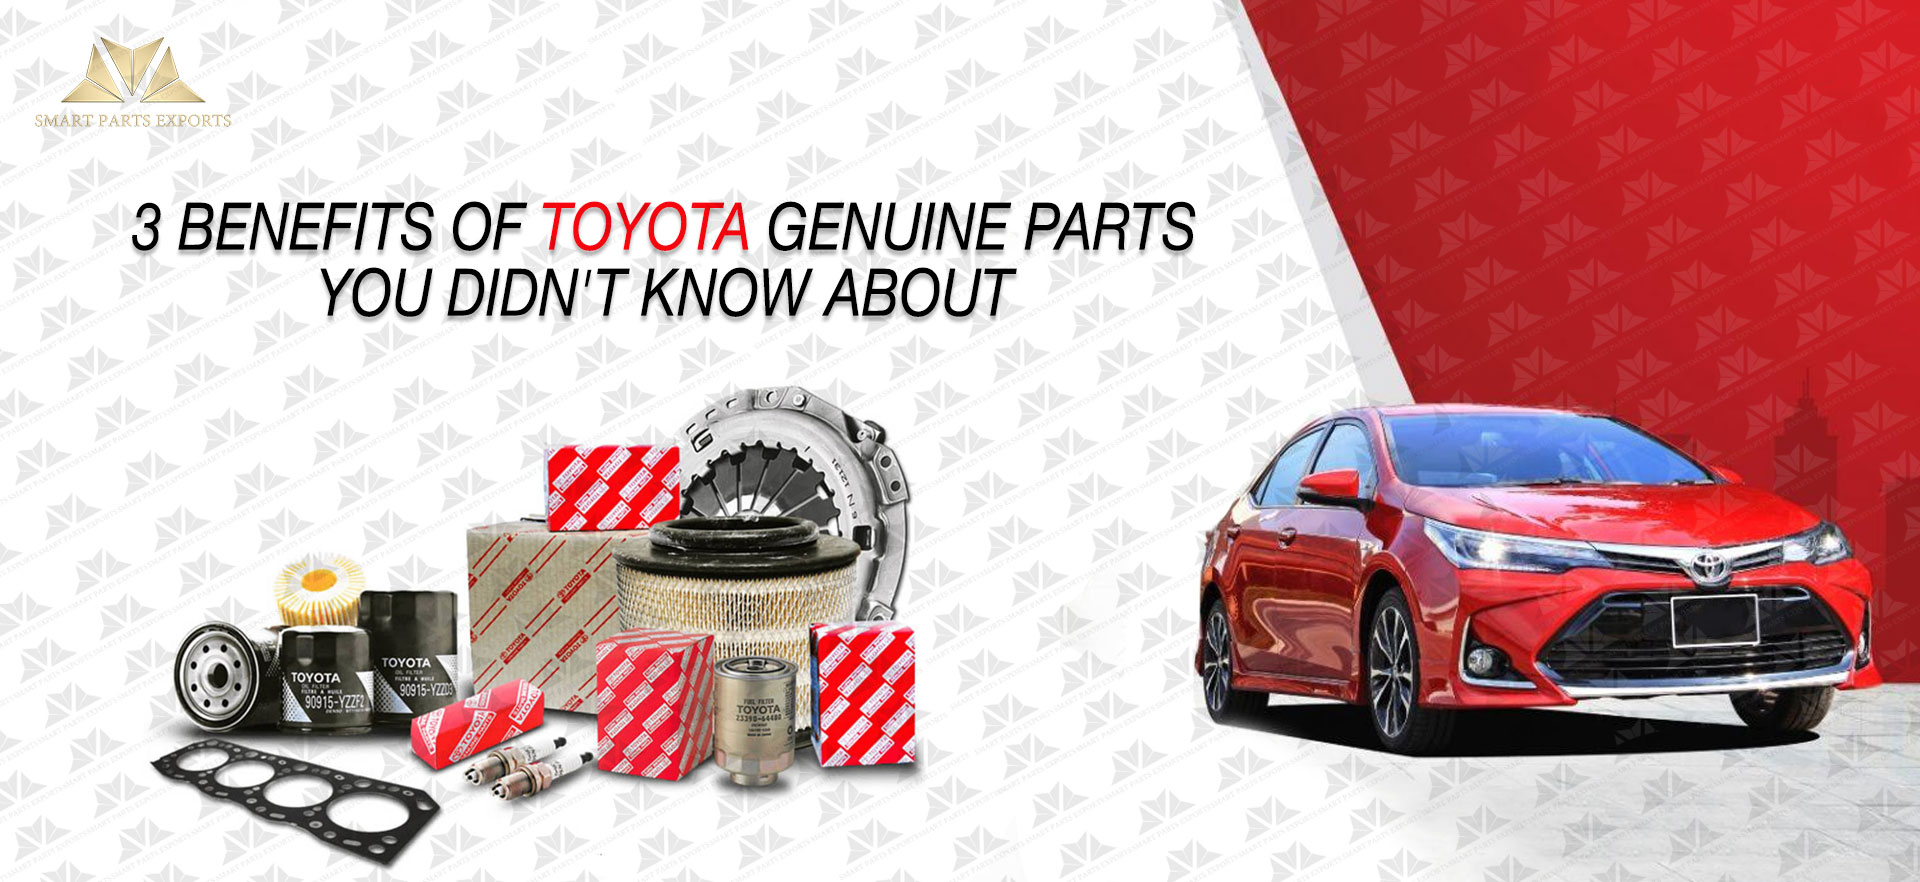 3 Benefits of Toyota Genuine Parts You Didn't Know About